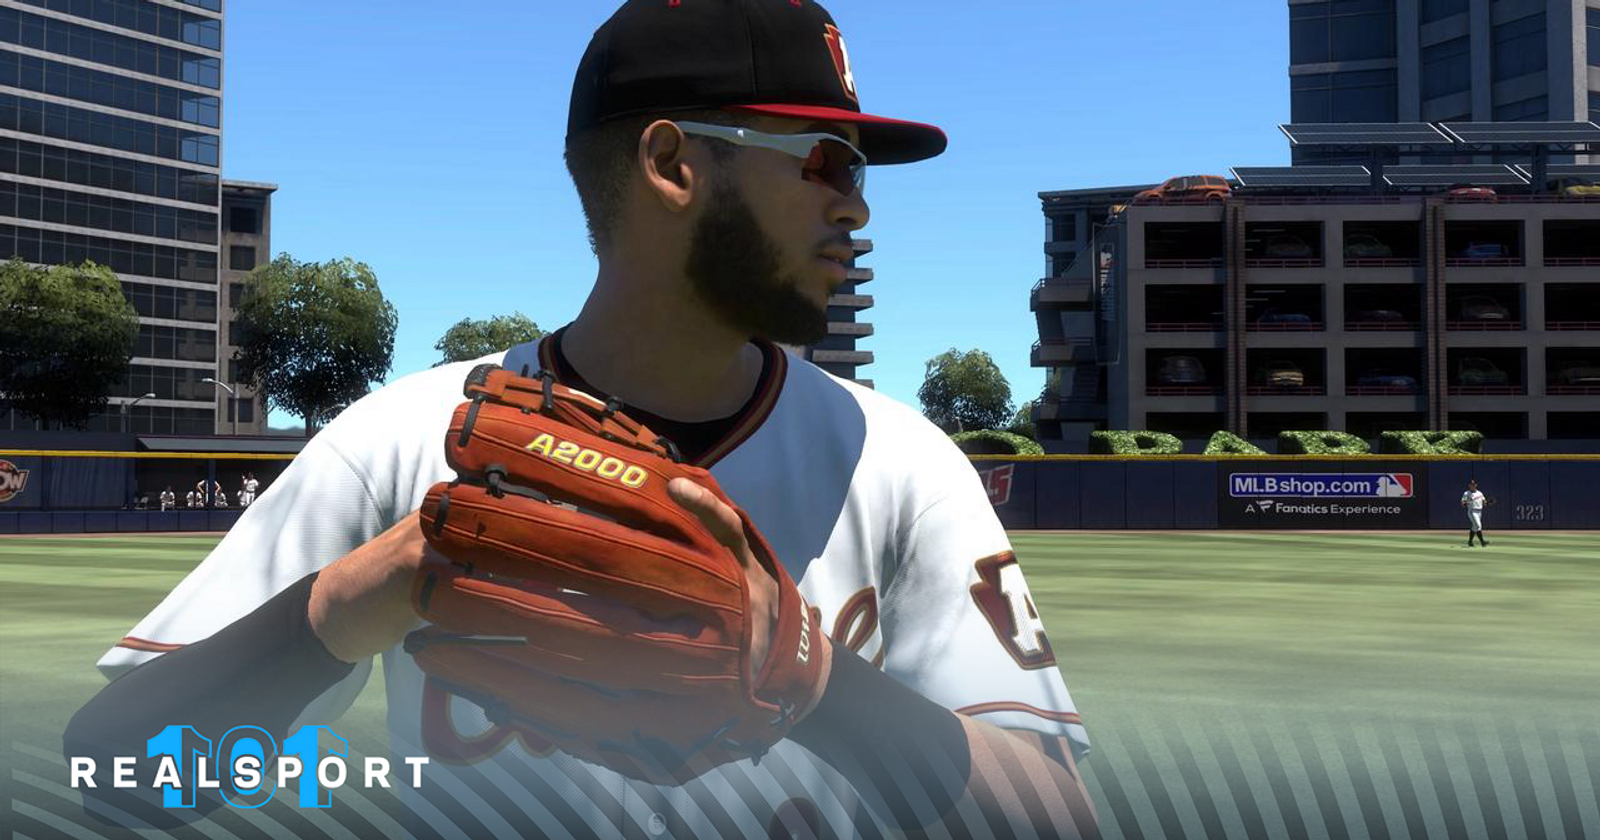 MLB® The Show™ - Spring Cleanup Featured Program debuts in MLB The Show 22